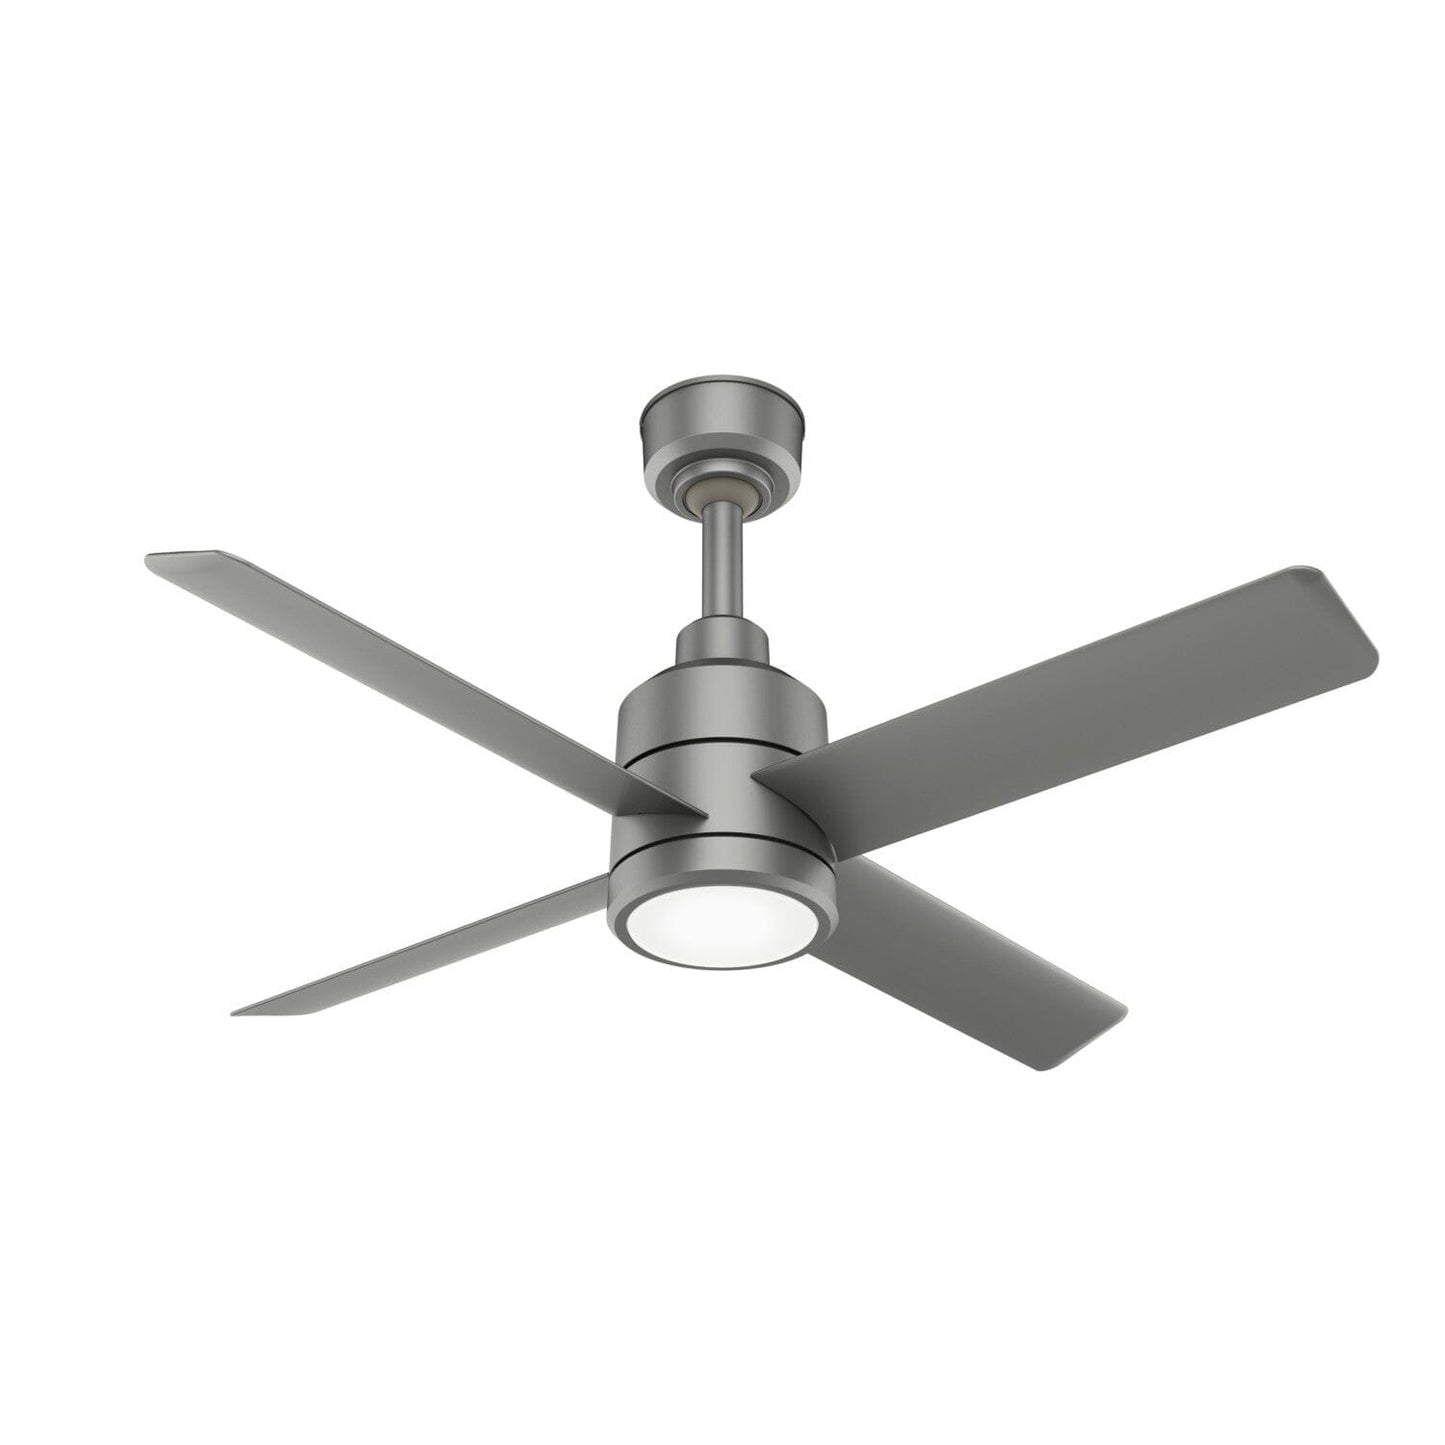 60 Inches 120v Ceiling Fan Hunter